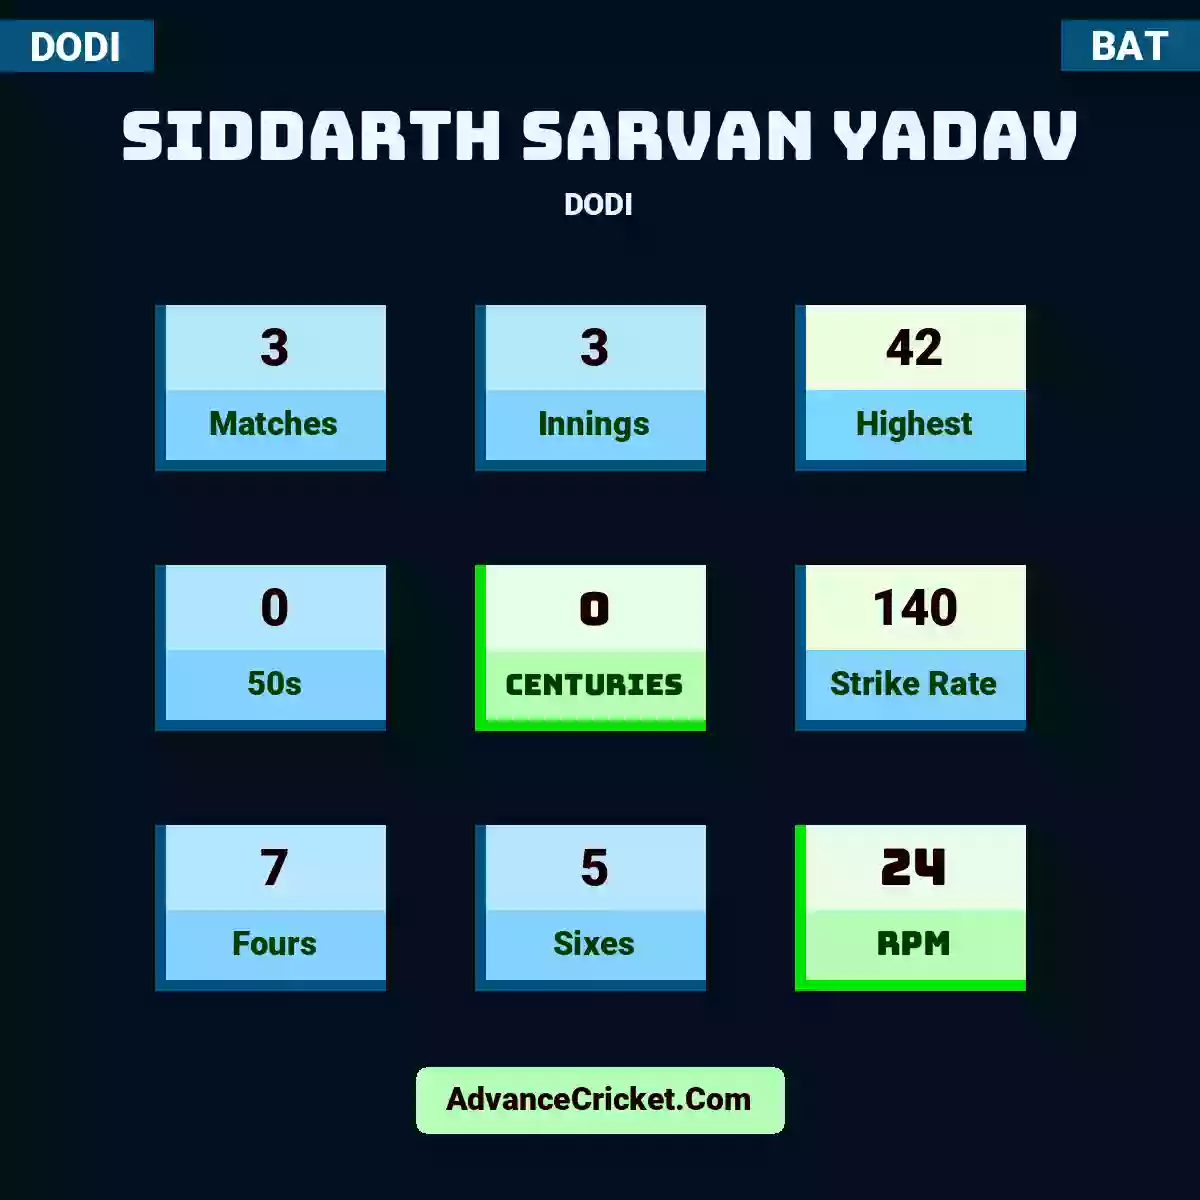 Siddarth Sarvan Yadav DODI , Siddarth Sarvan Yadav played 3 matches, scored 42 runs as highest, 0 half-centuries, and 0 centuries, with a strike rate of 140. S.Yadav hit 7 fours and 5 sixes, with an RPM of 24.